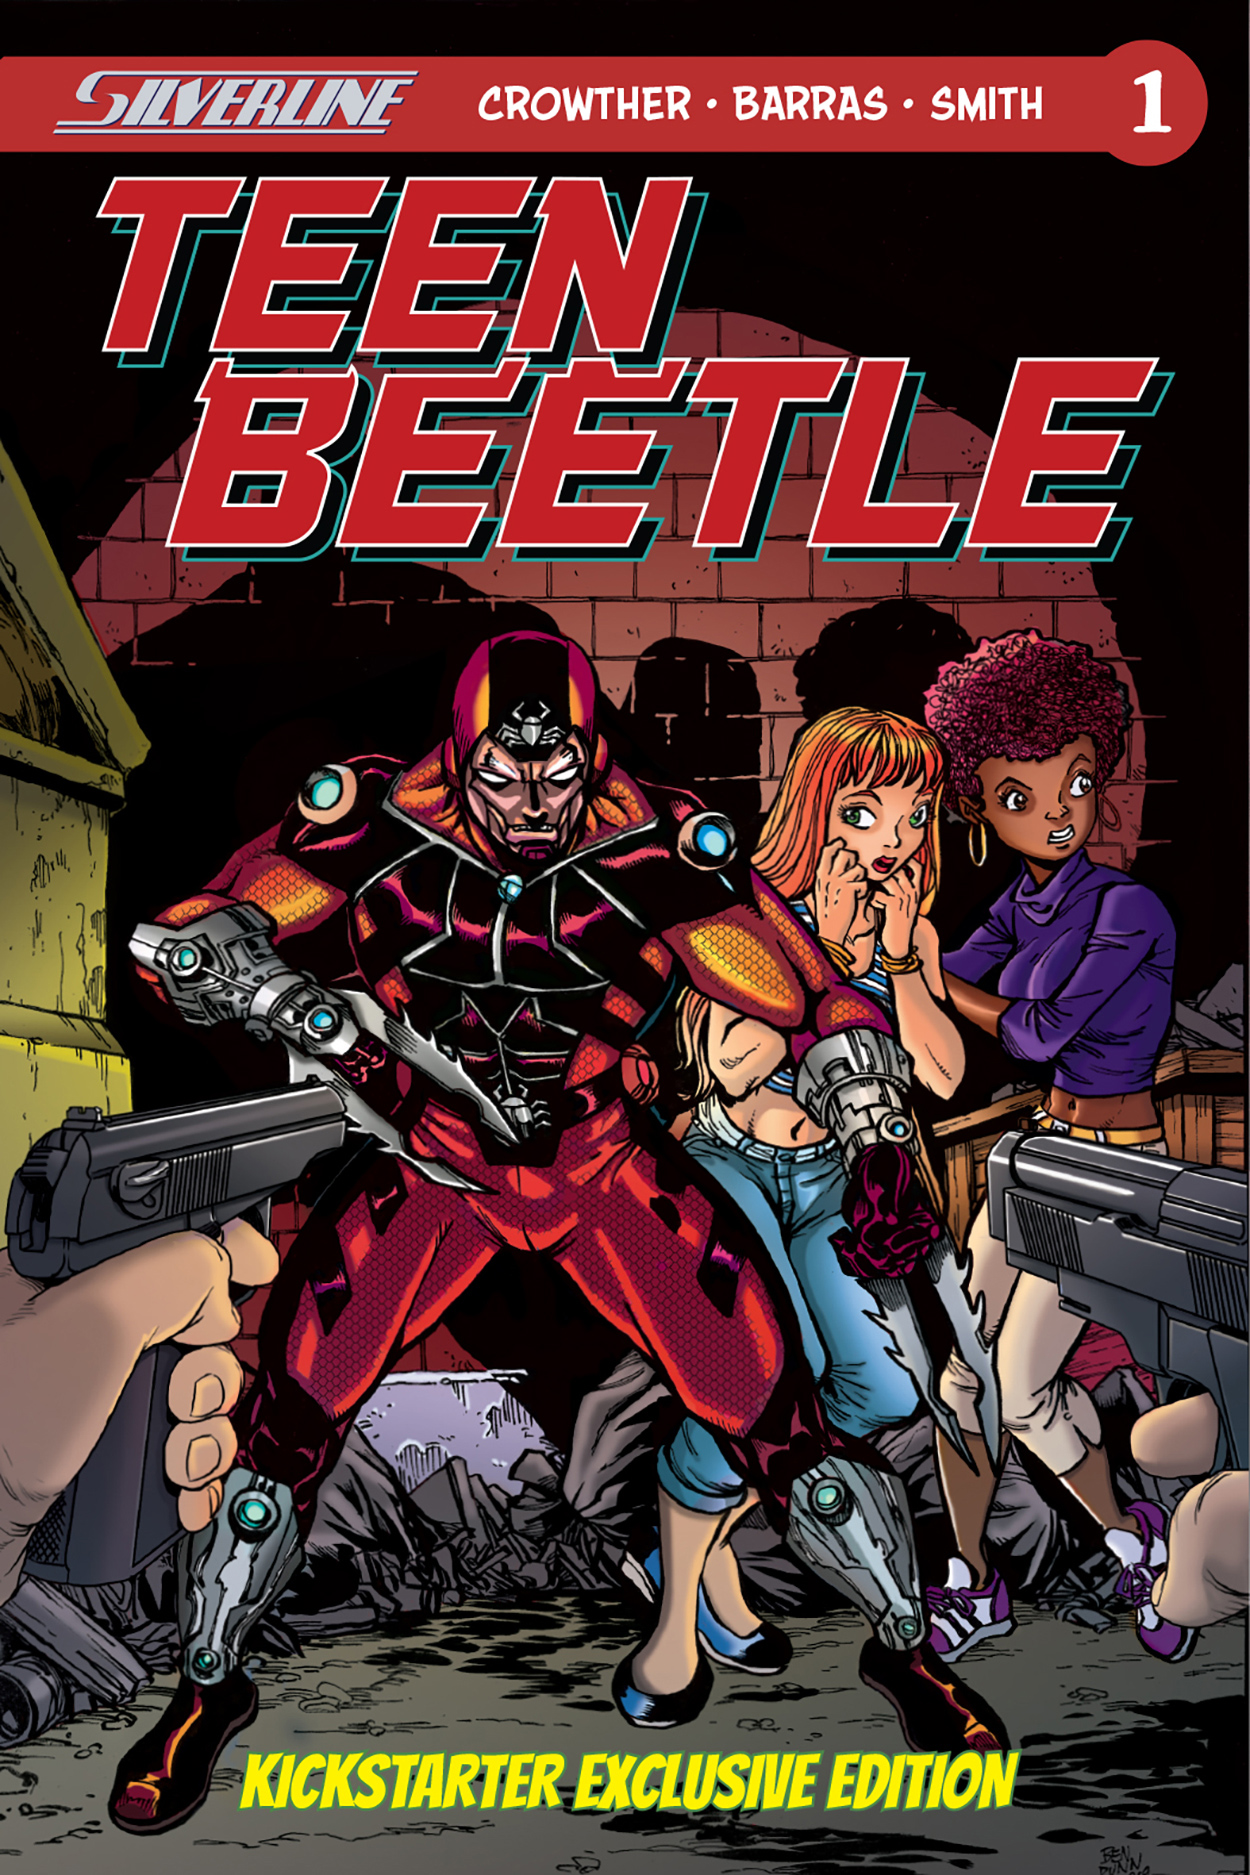 Silverline Double Feature: Teen Beetle #1 and Switchblade #1